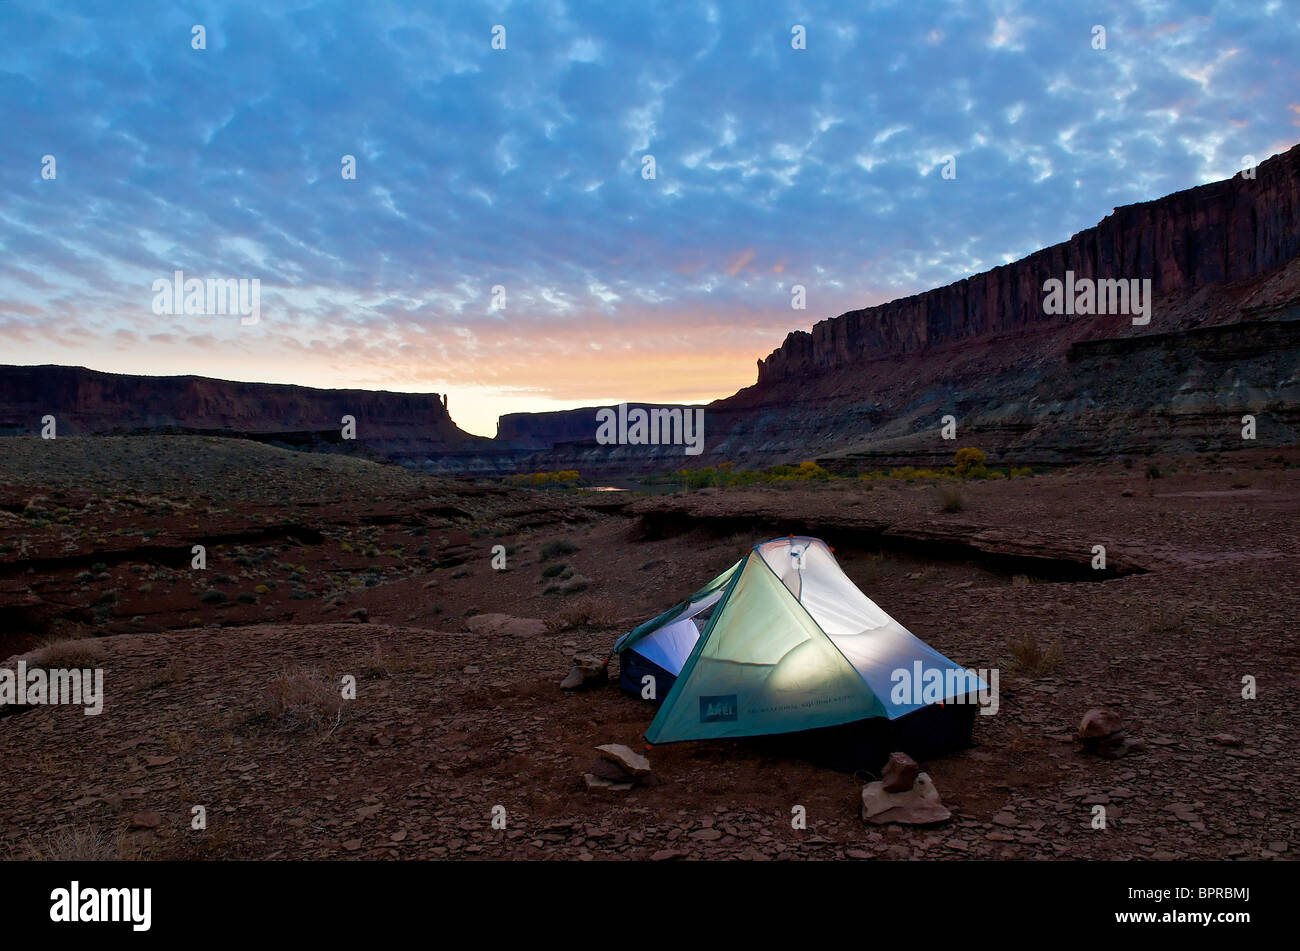 A tent at a camp site in the desert. Stock Photo